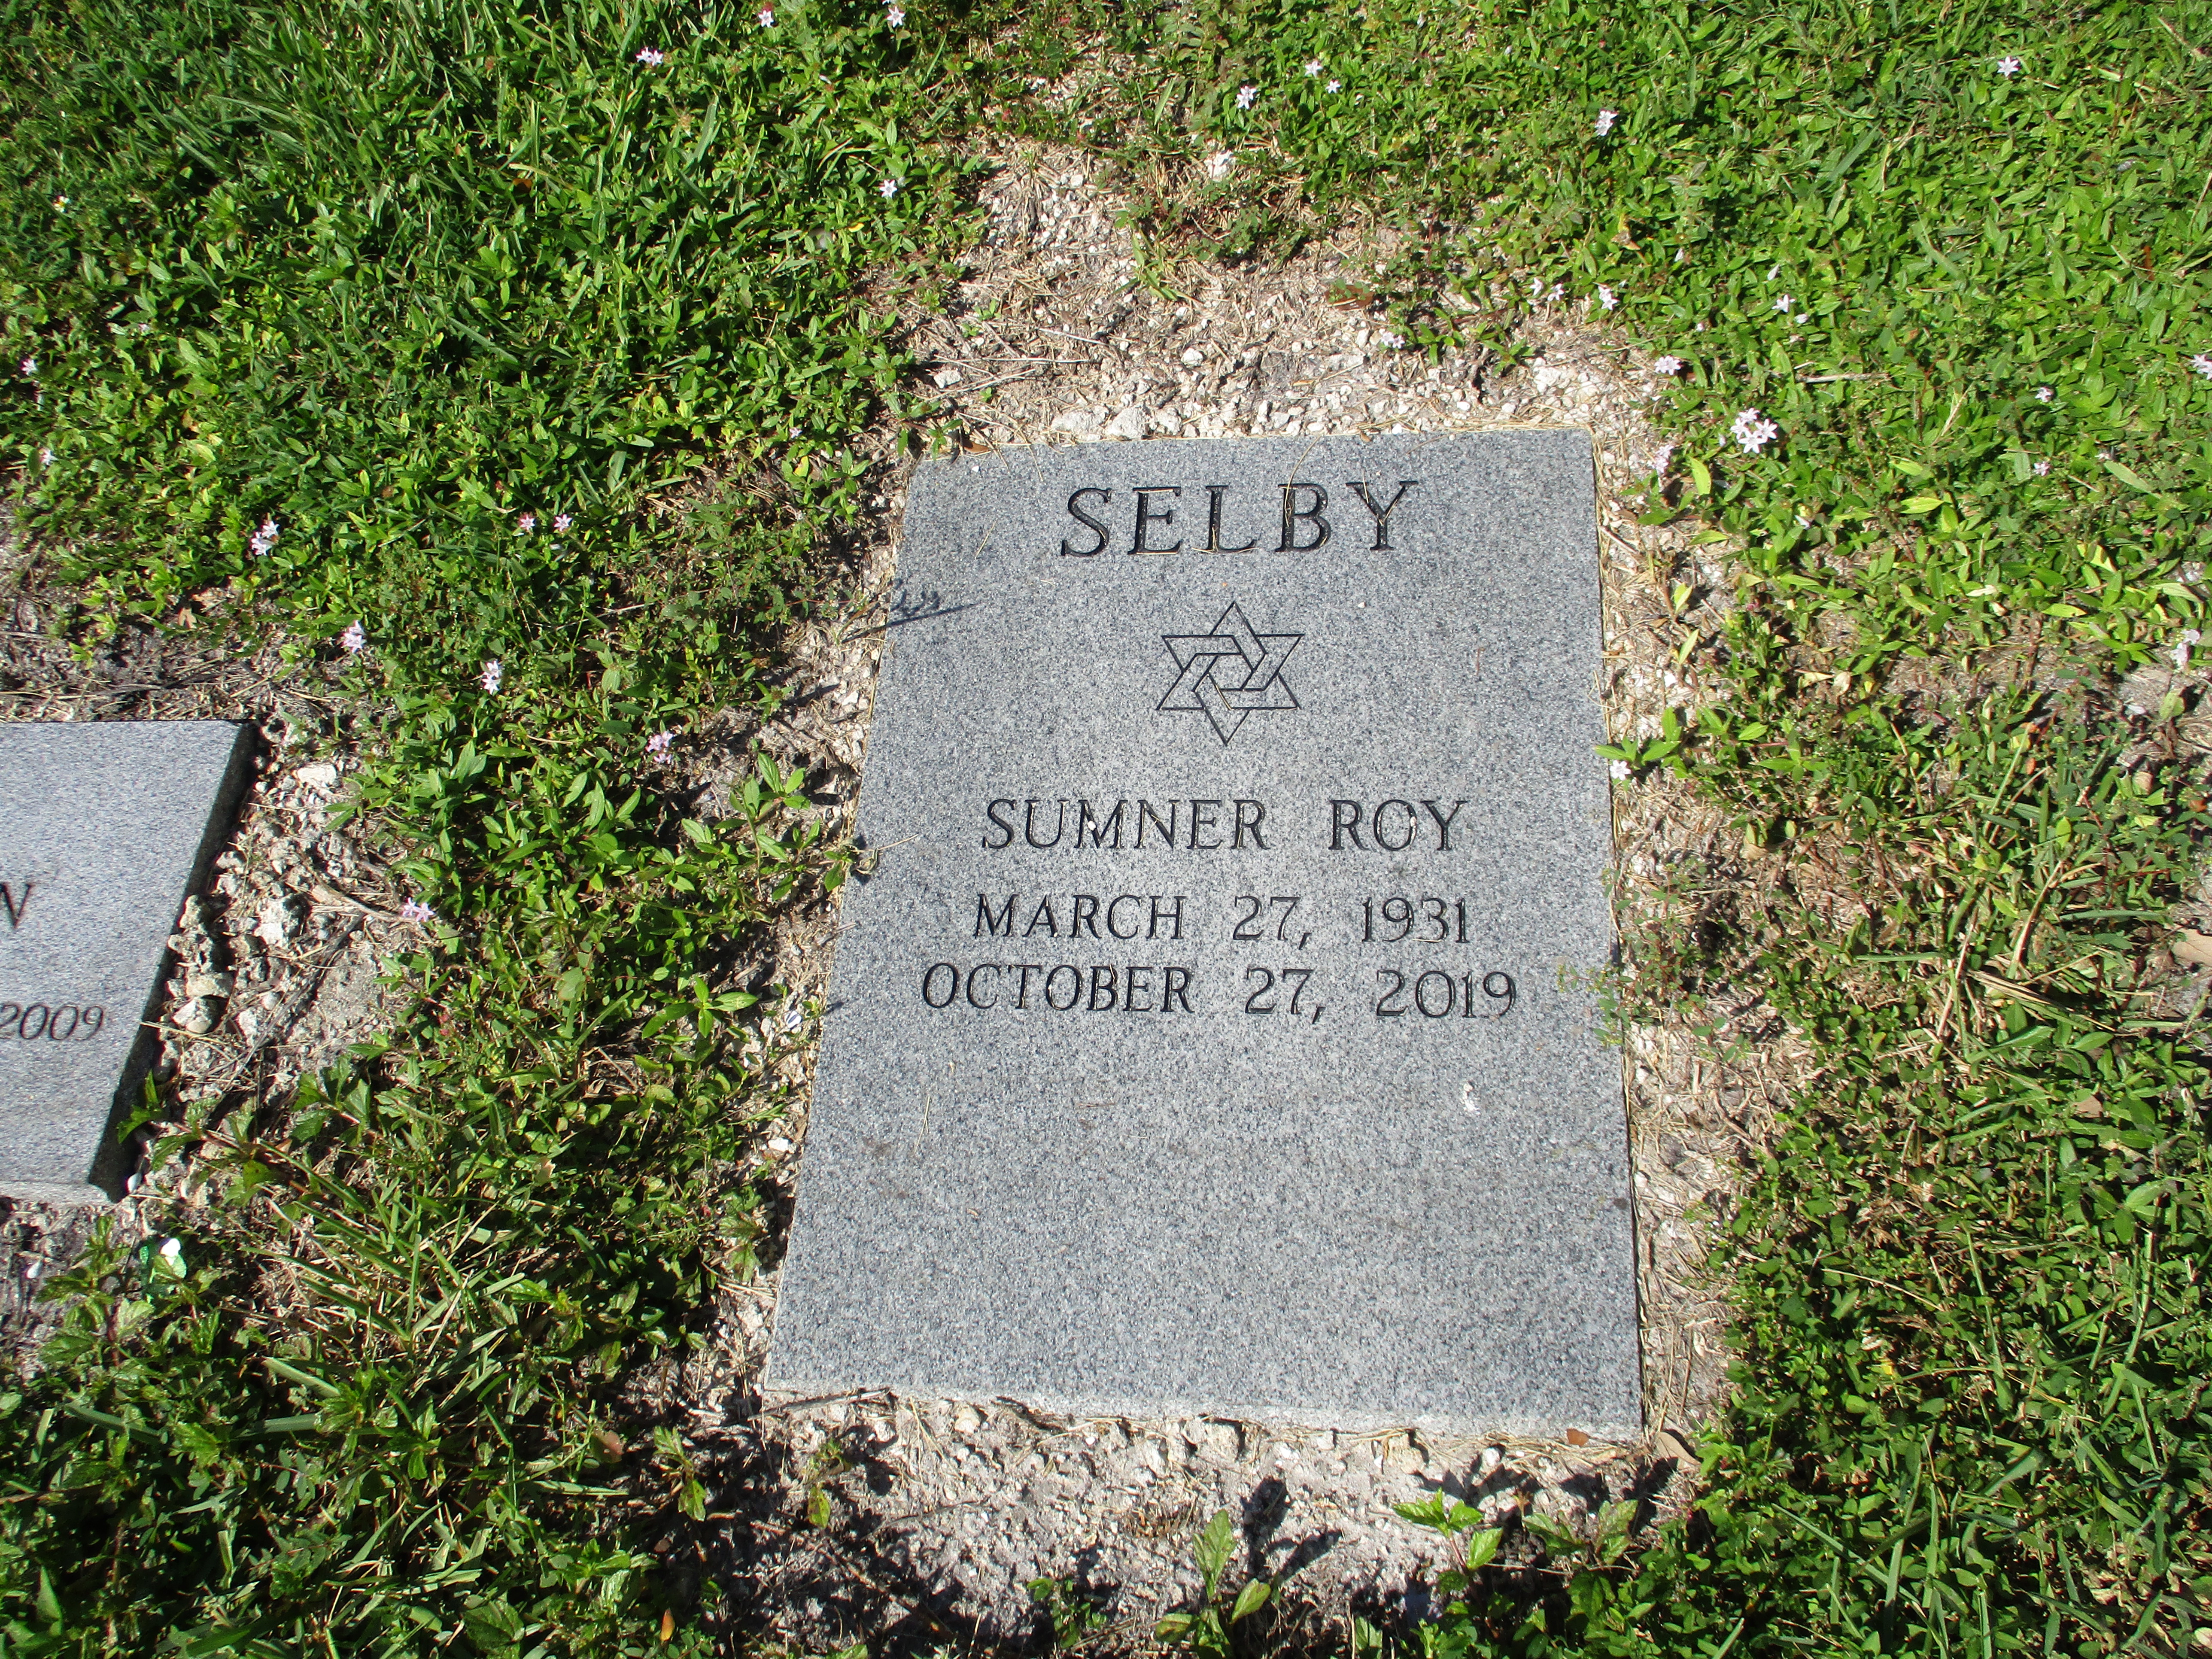 Sumner Roy Selby